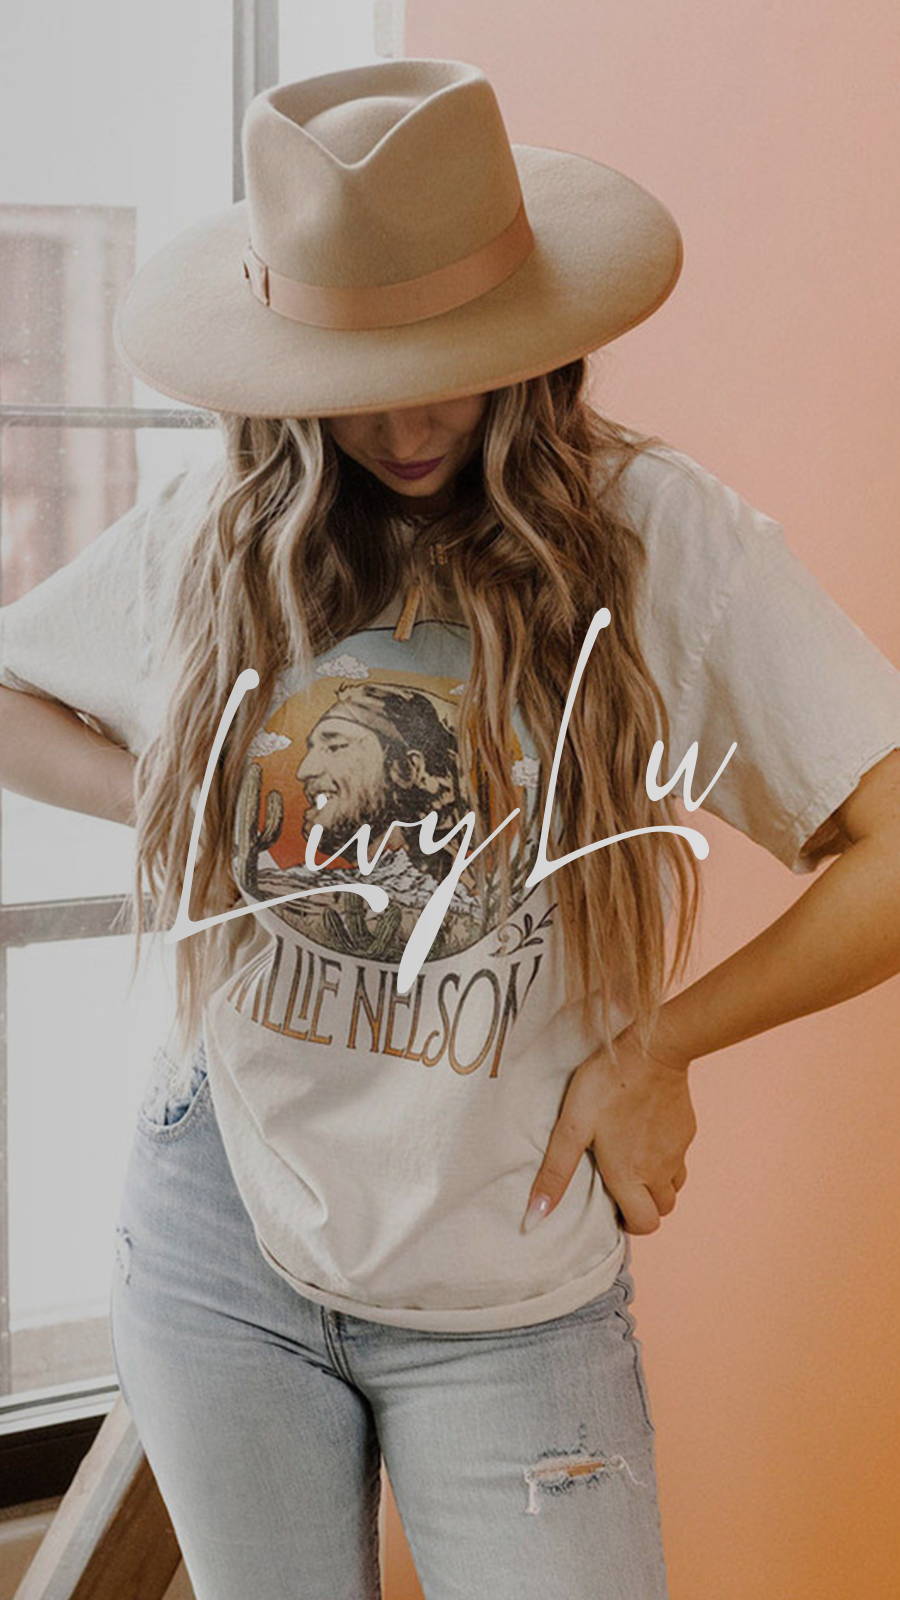 Young woman wearing Willie Nelson tee, jeans, and a brimmed hat